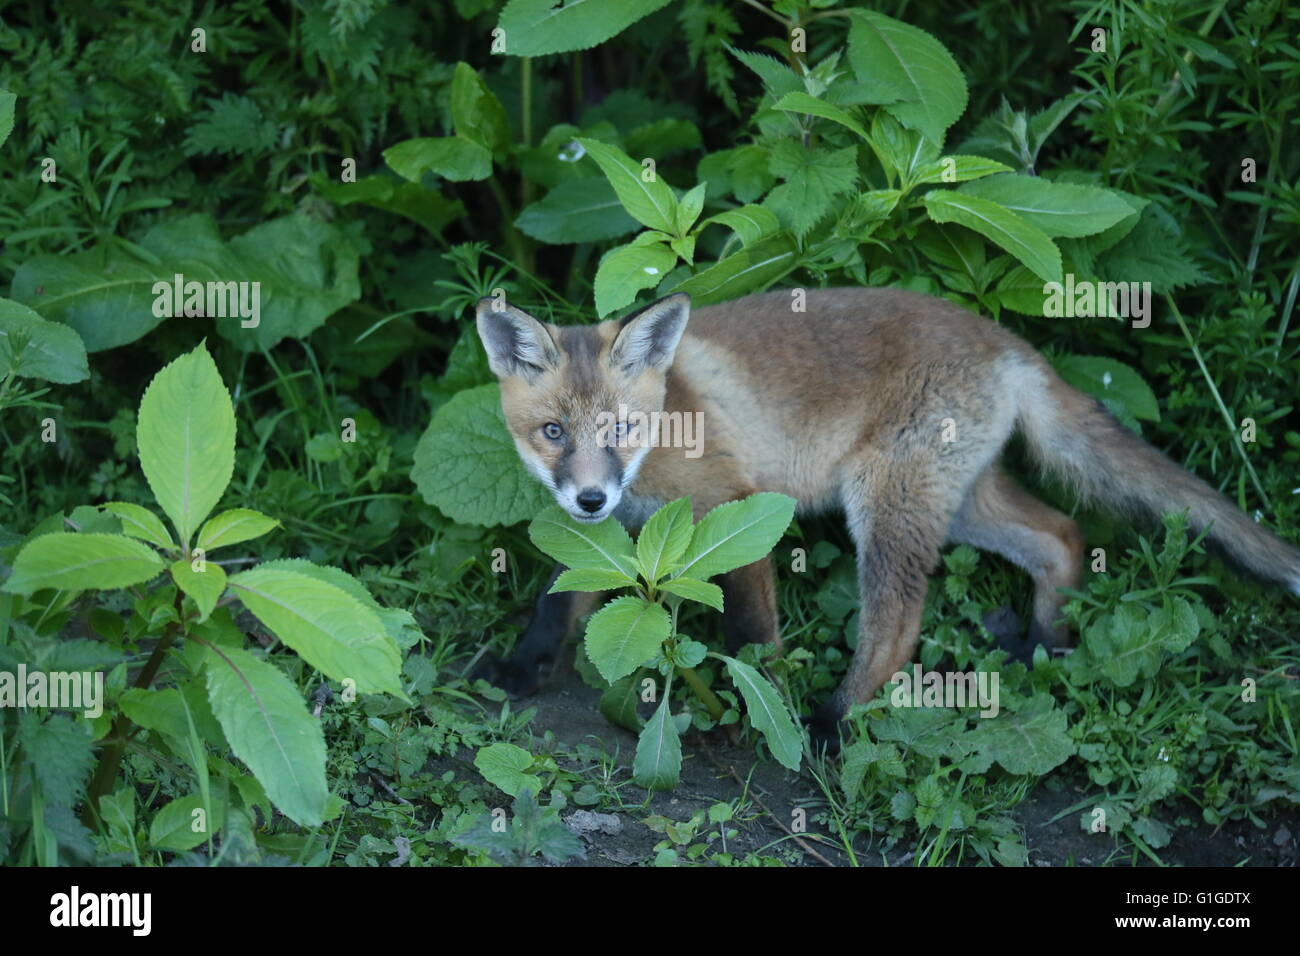 Image of a fox cub walking among wild plants in South Dublin in May 2016 Stock Photo